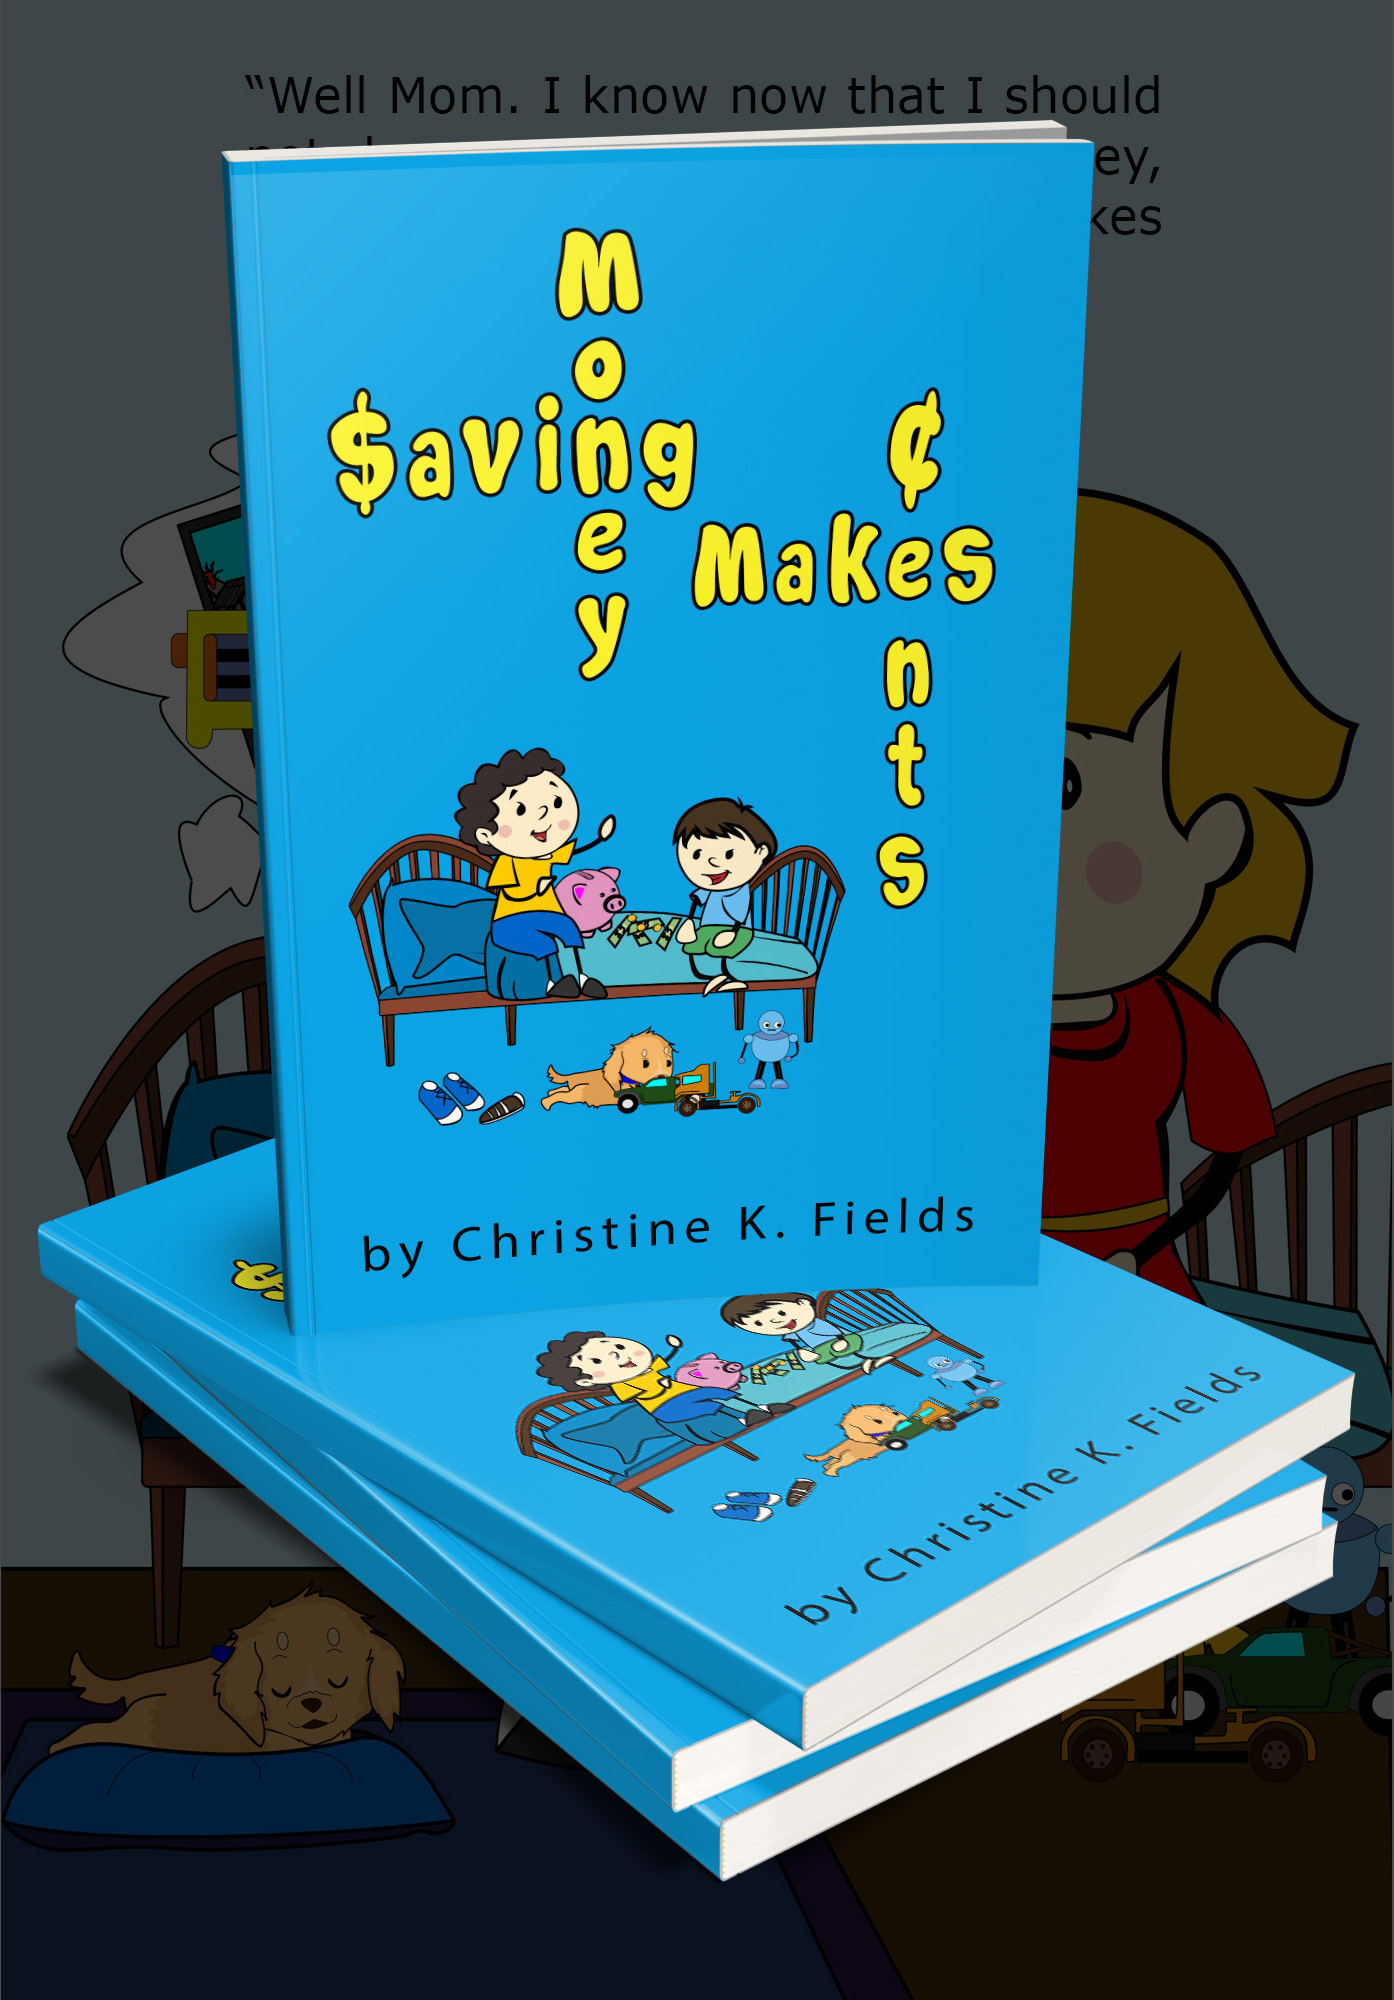 FREE: Saving Money Makes Cents: Spending Foolishly Empties The Bank by Christine K Fields